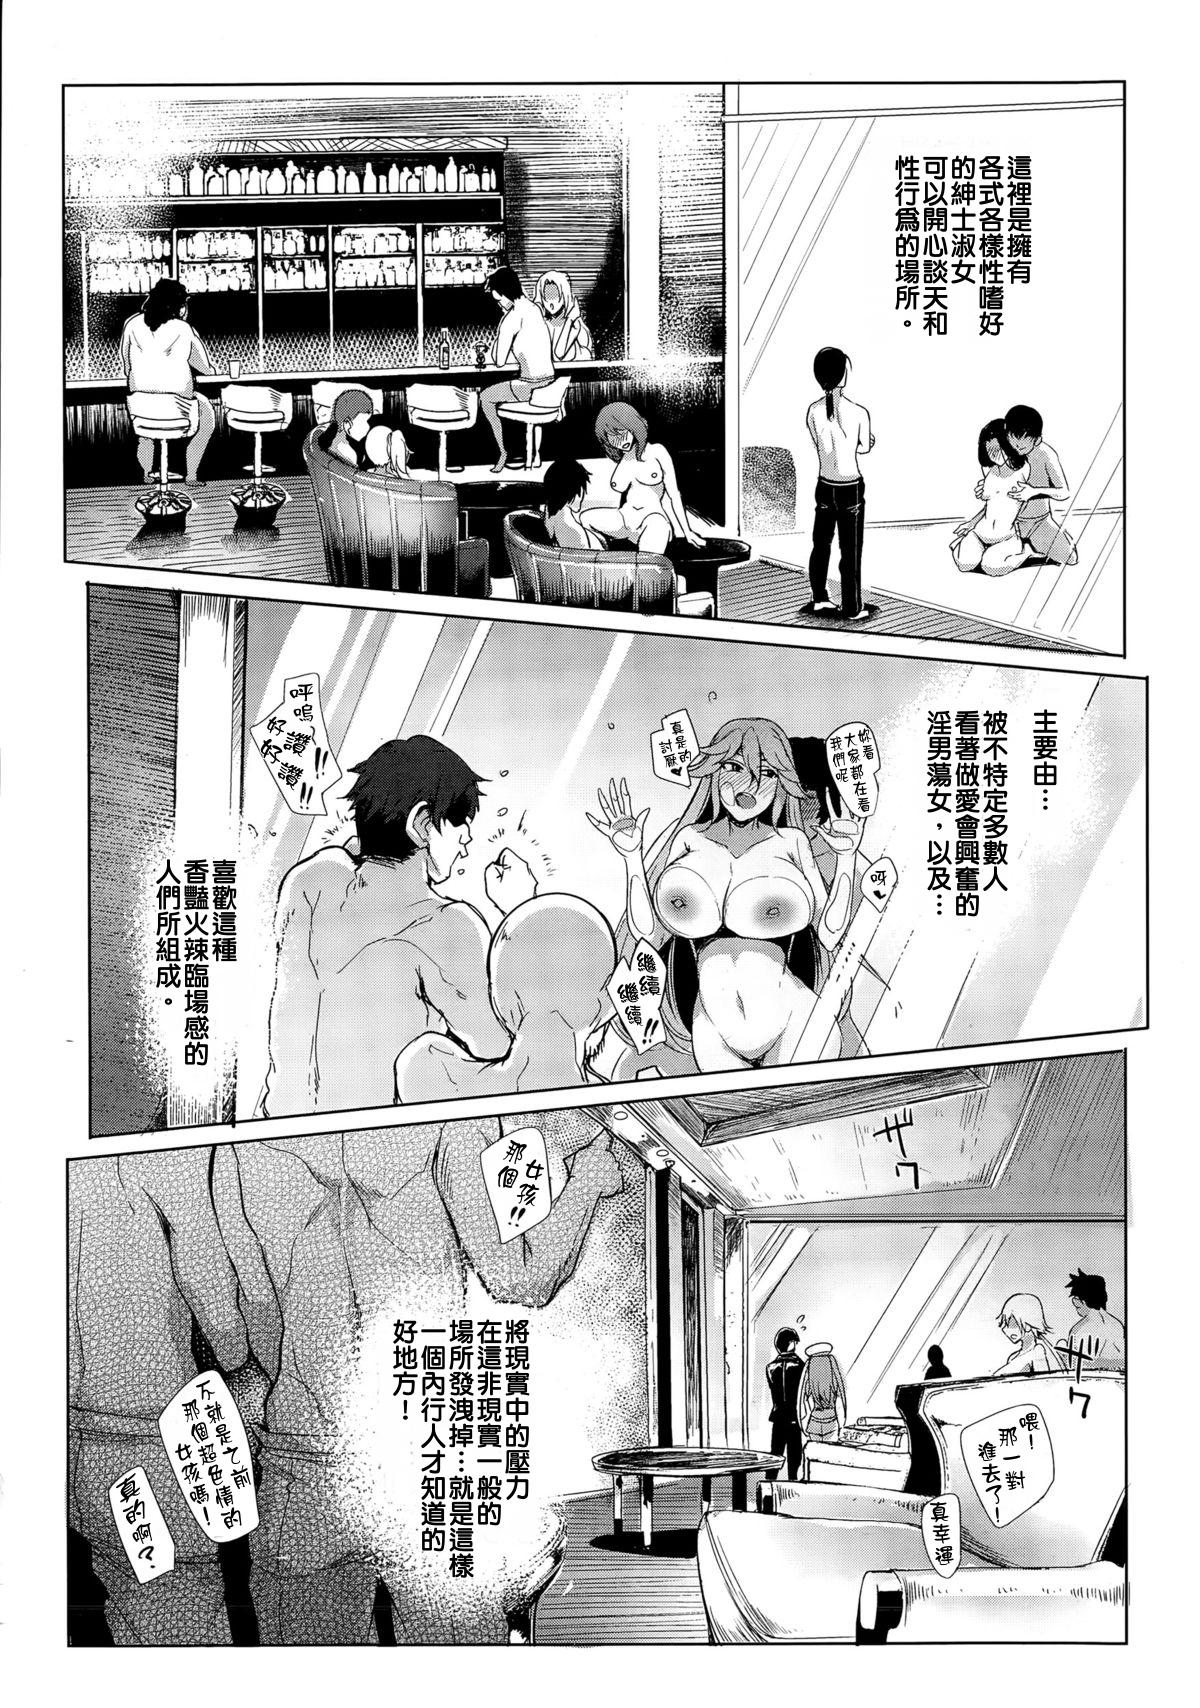 Class Room Soku Hame Gal Bitch ! ＋ Mise Hame Gal Bitch ! | One-Night Stand with a Gyaru Slut! + Fucking a Gyaru Slut! + Gals Bitch After Oshiri Hen | Gyaru Slut! After Butt Edition Suruba - Page 7